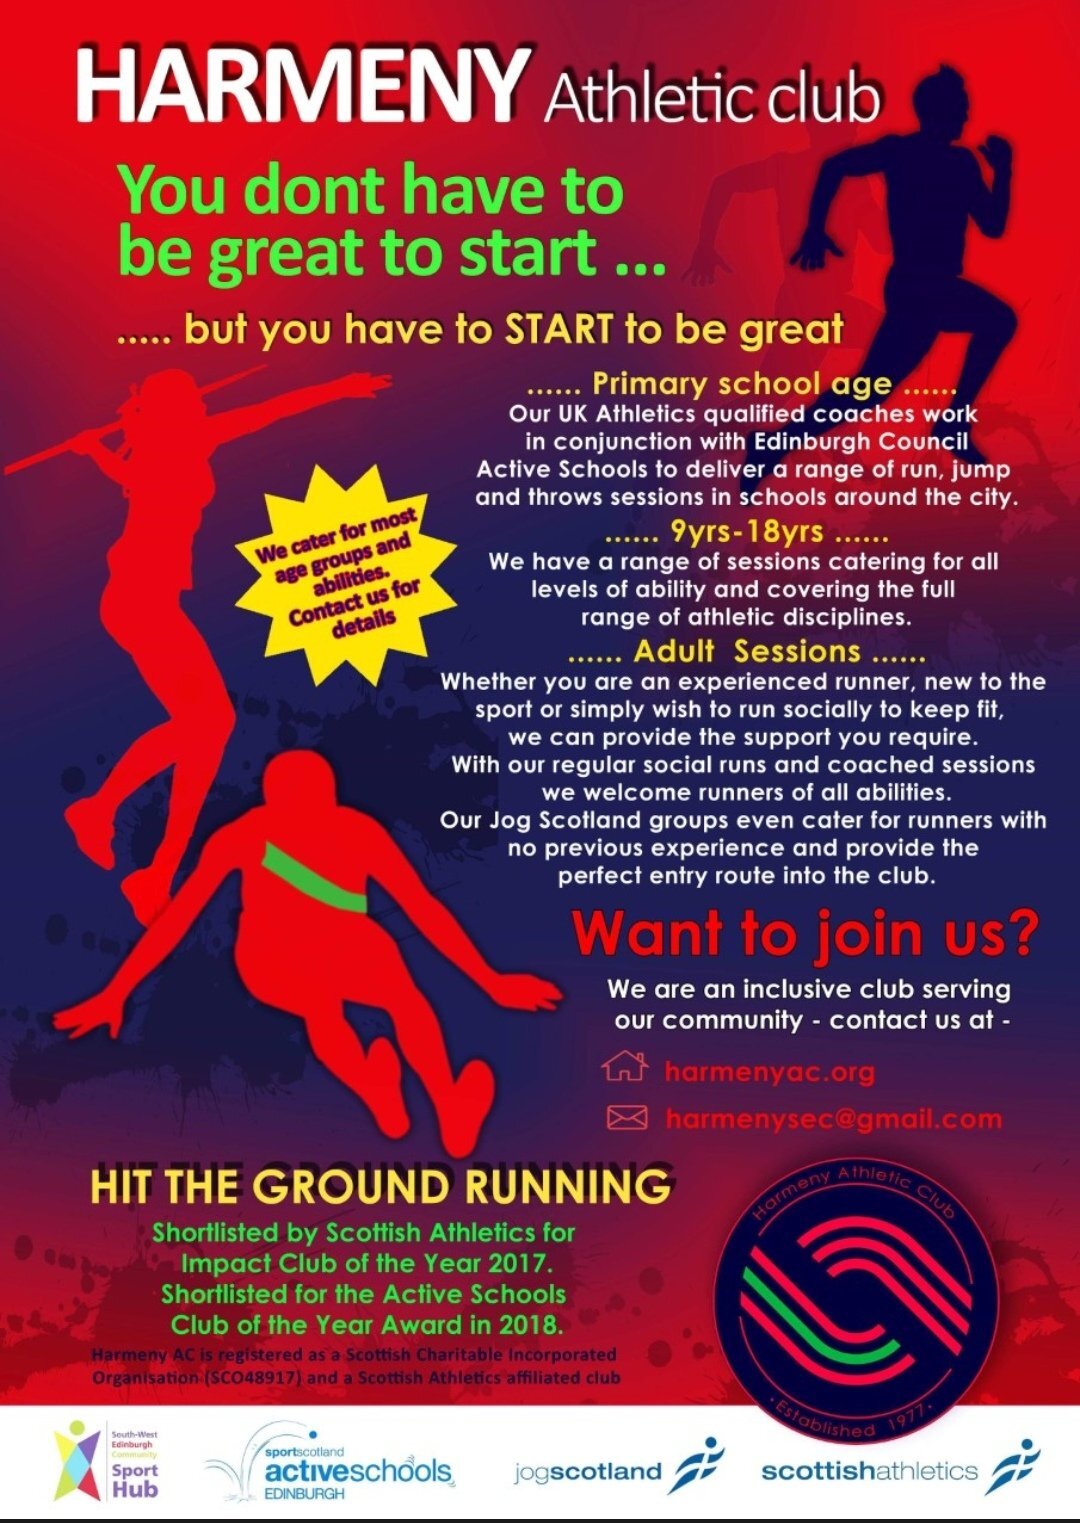 harmeny athletic club Flyer Featured Image